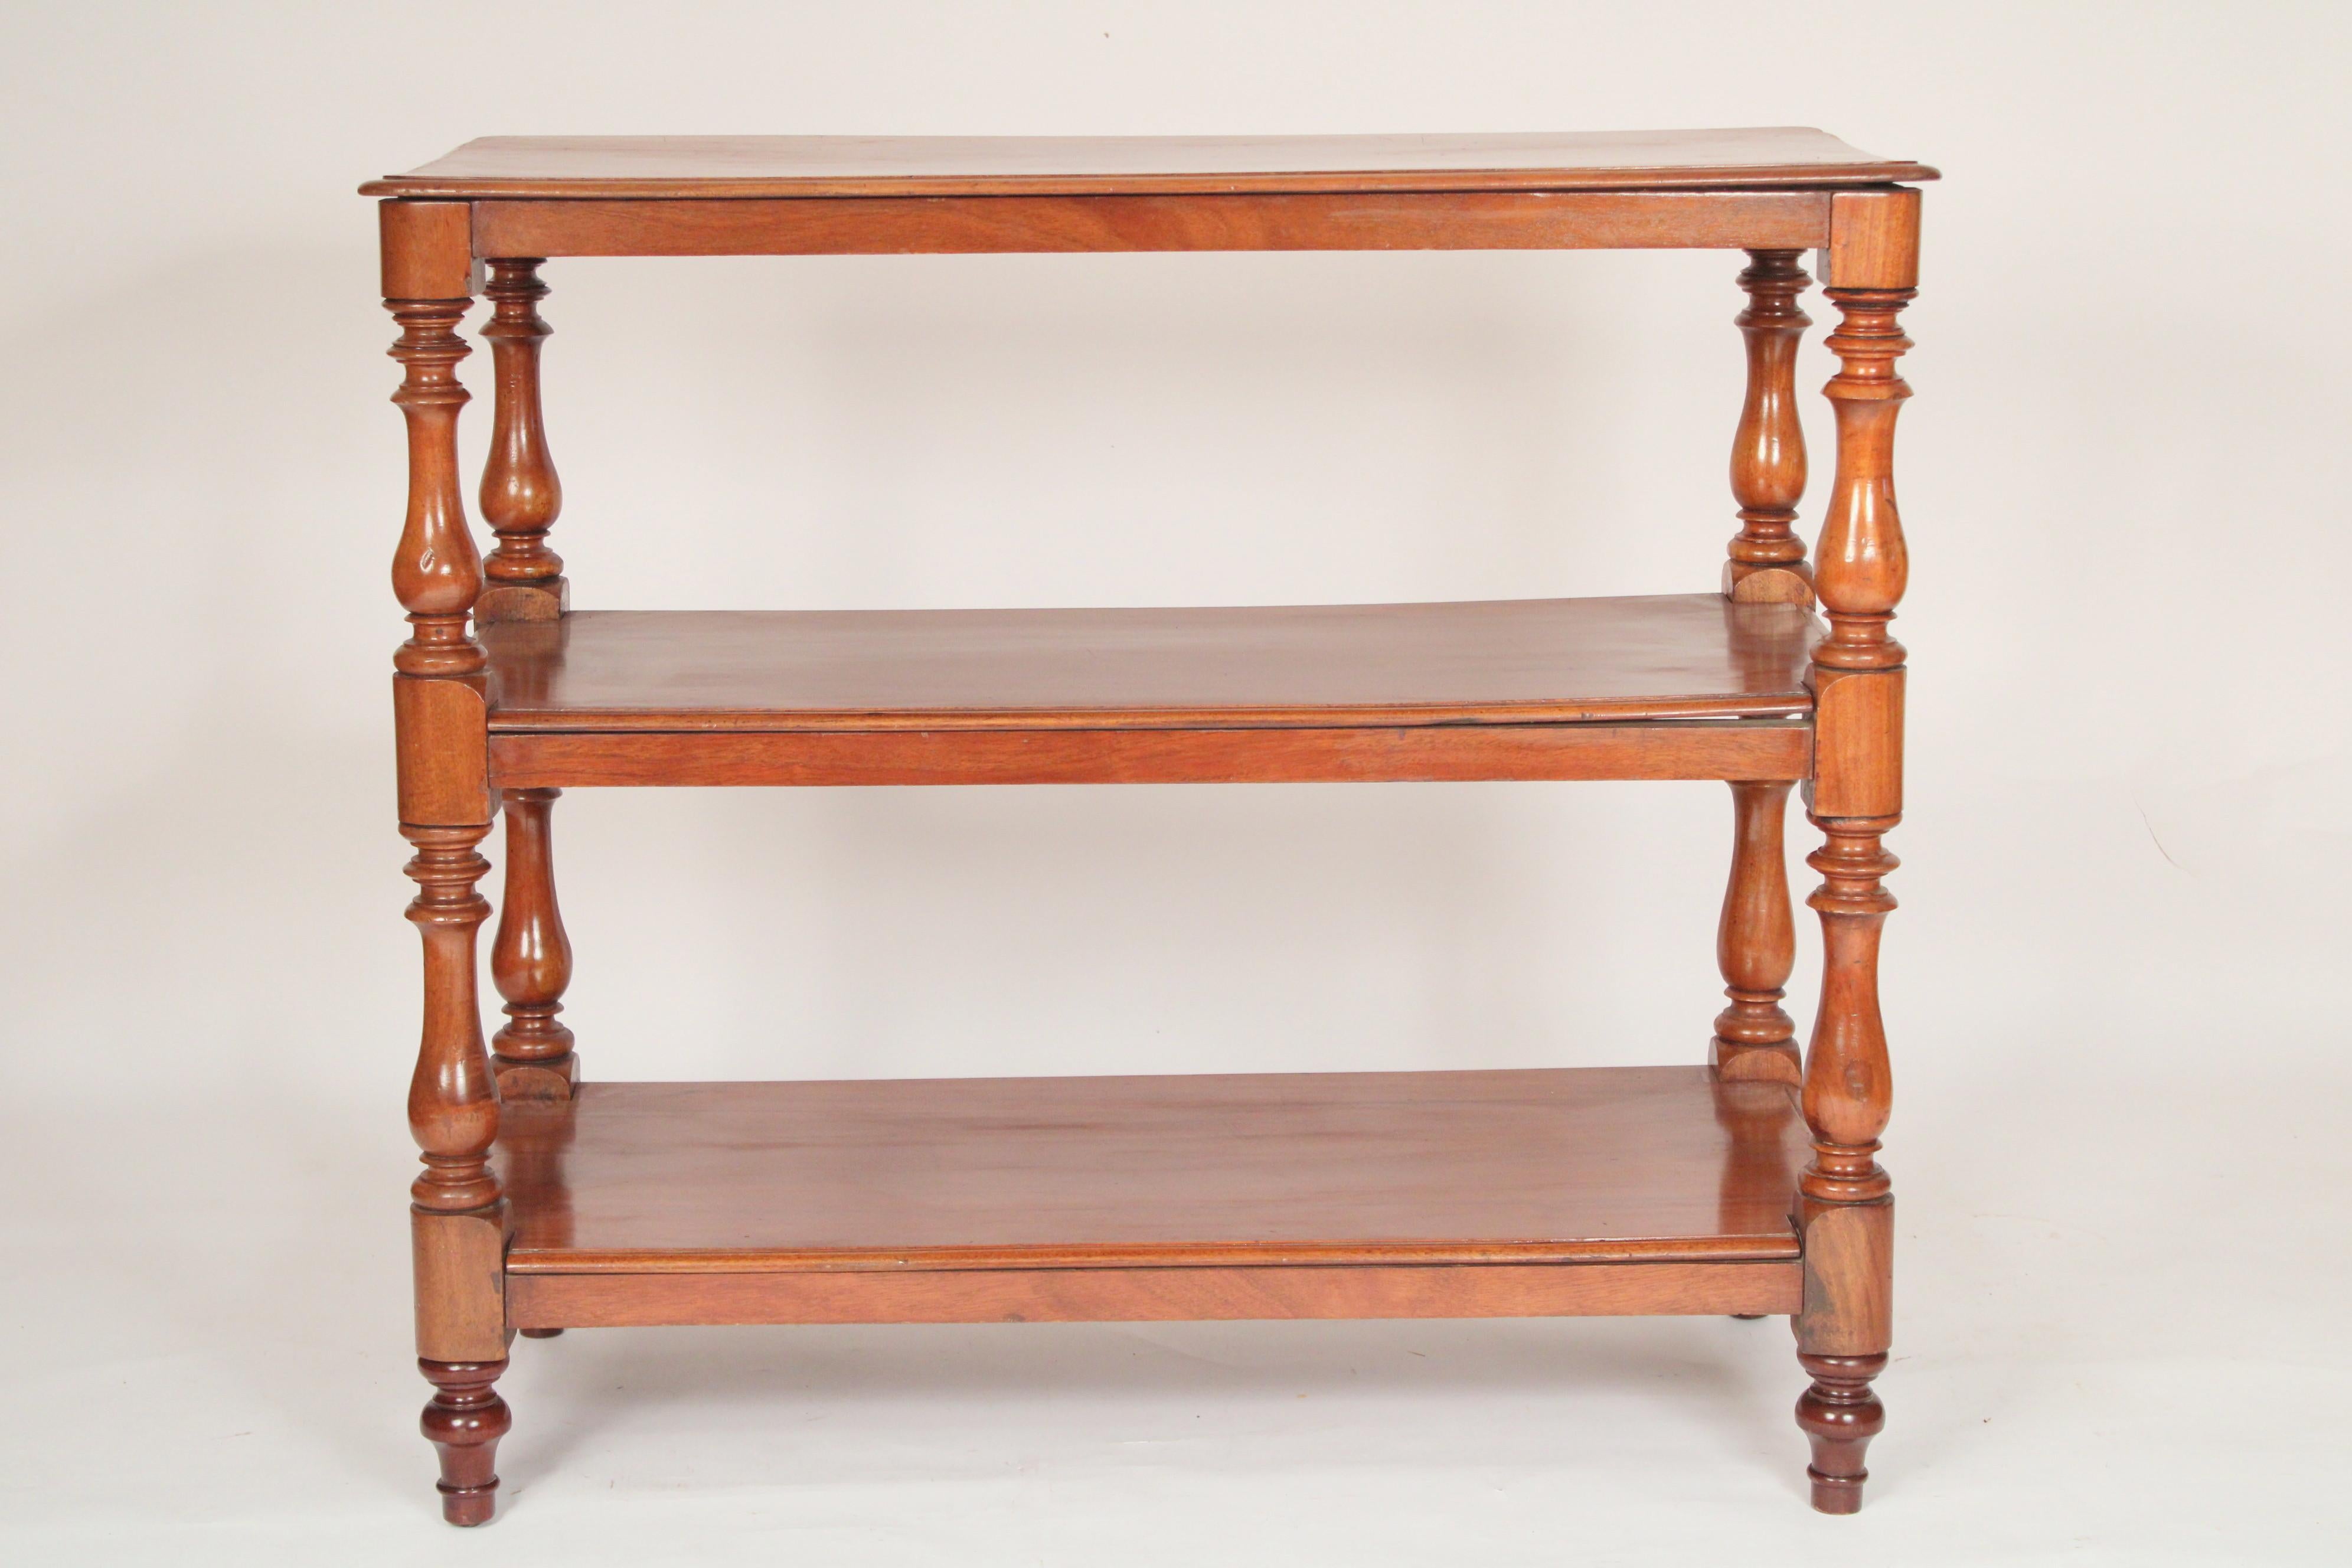 Antique William IV style mahogany 3 tier etagere, circa 1900. With a rectangular single board mahogany top with front, side and back molded edges, the two lower shelves with front and side molded edges, shelves supported by vase shaped supports.